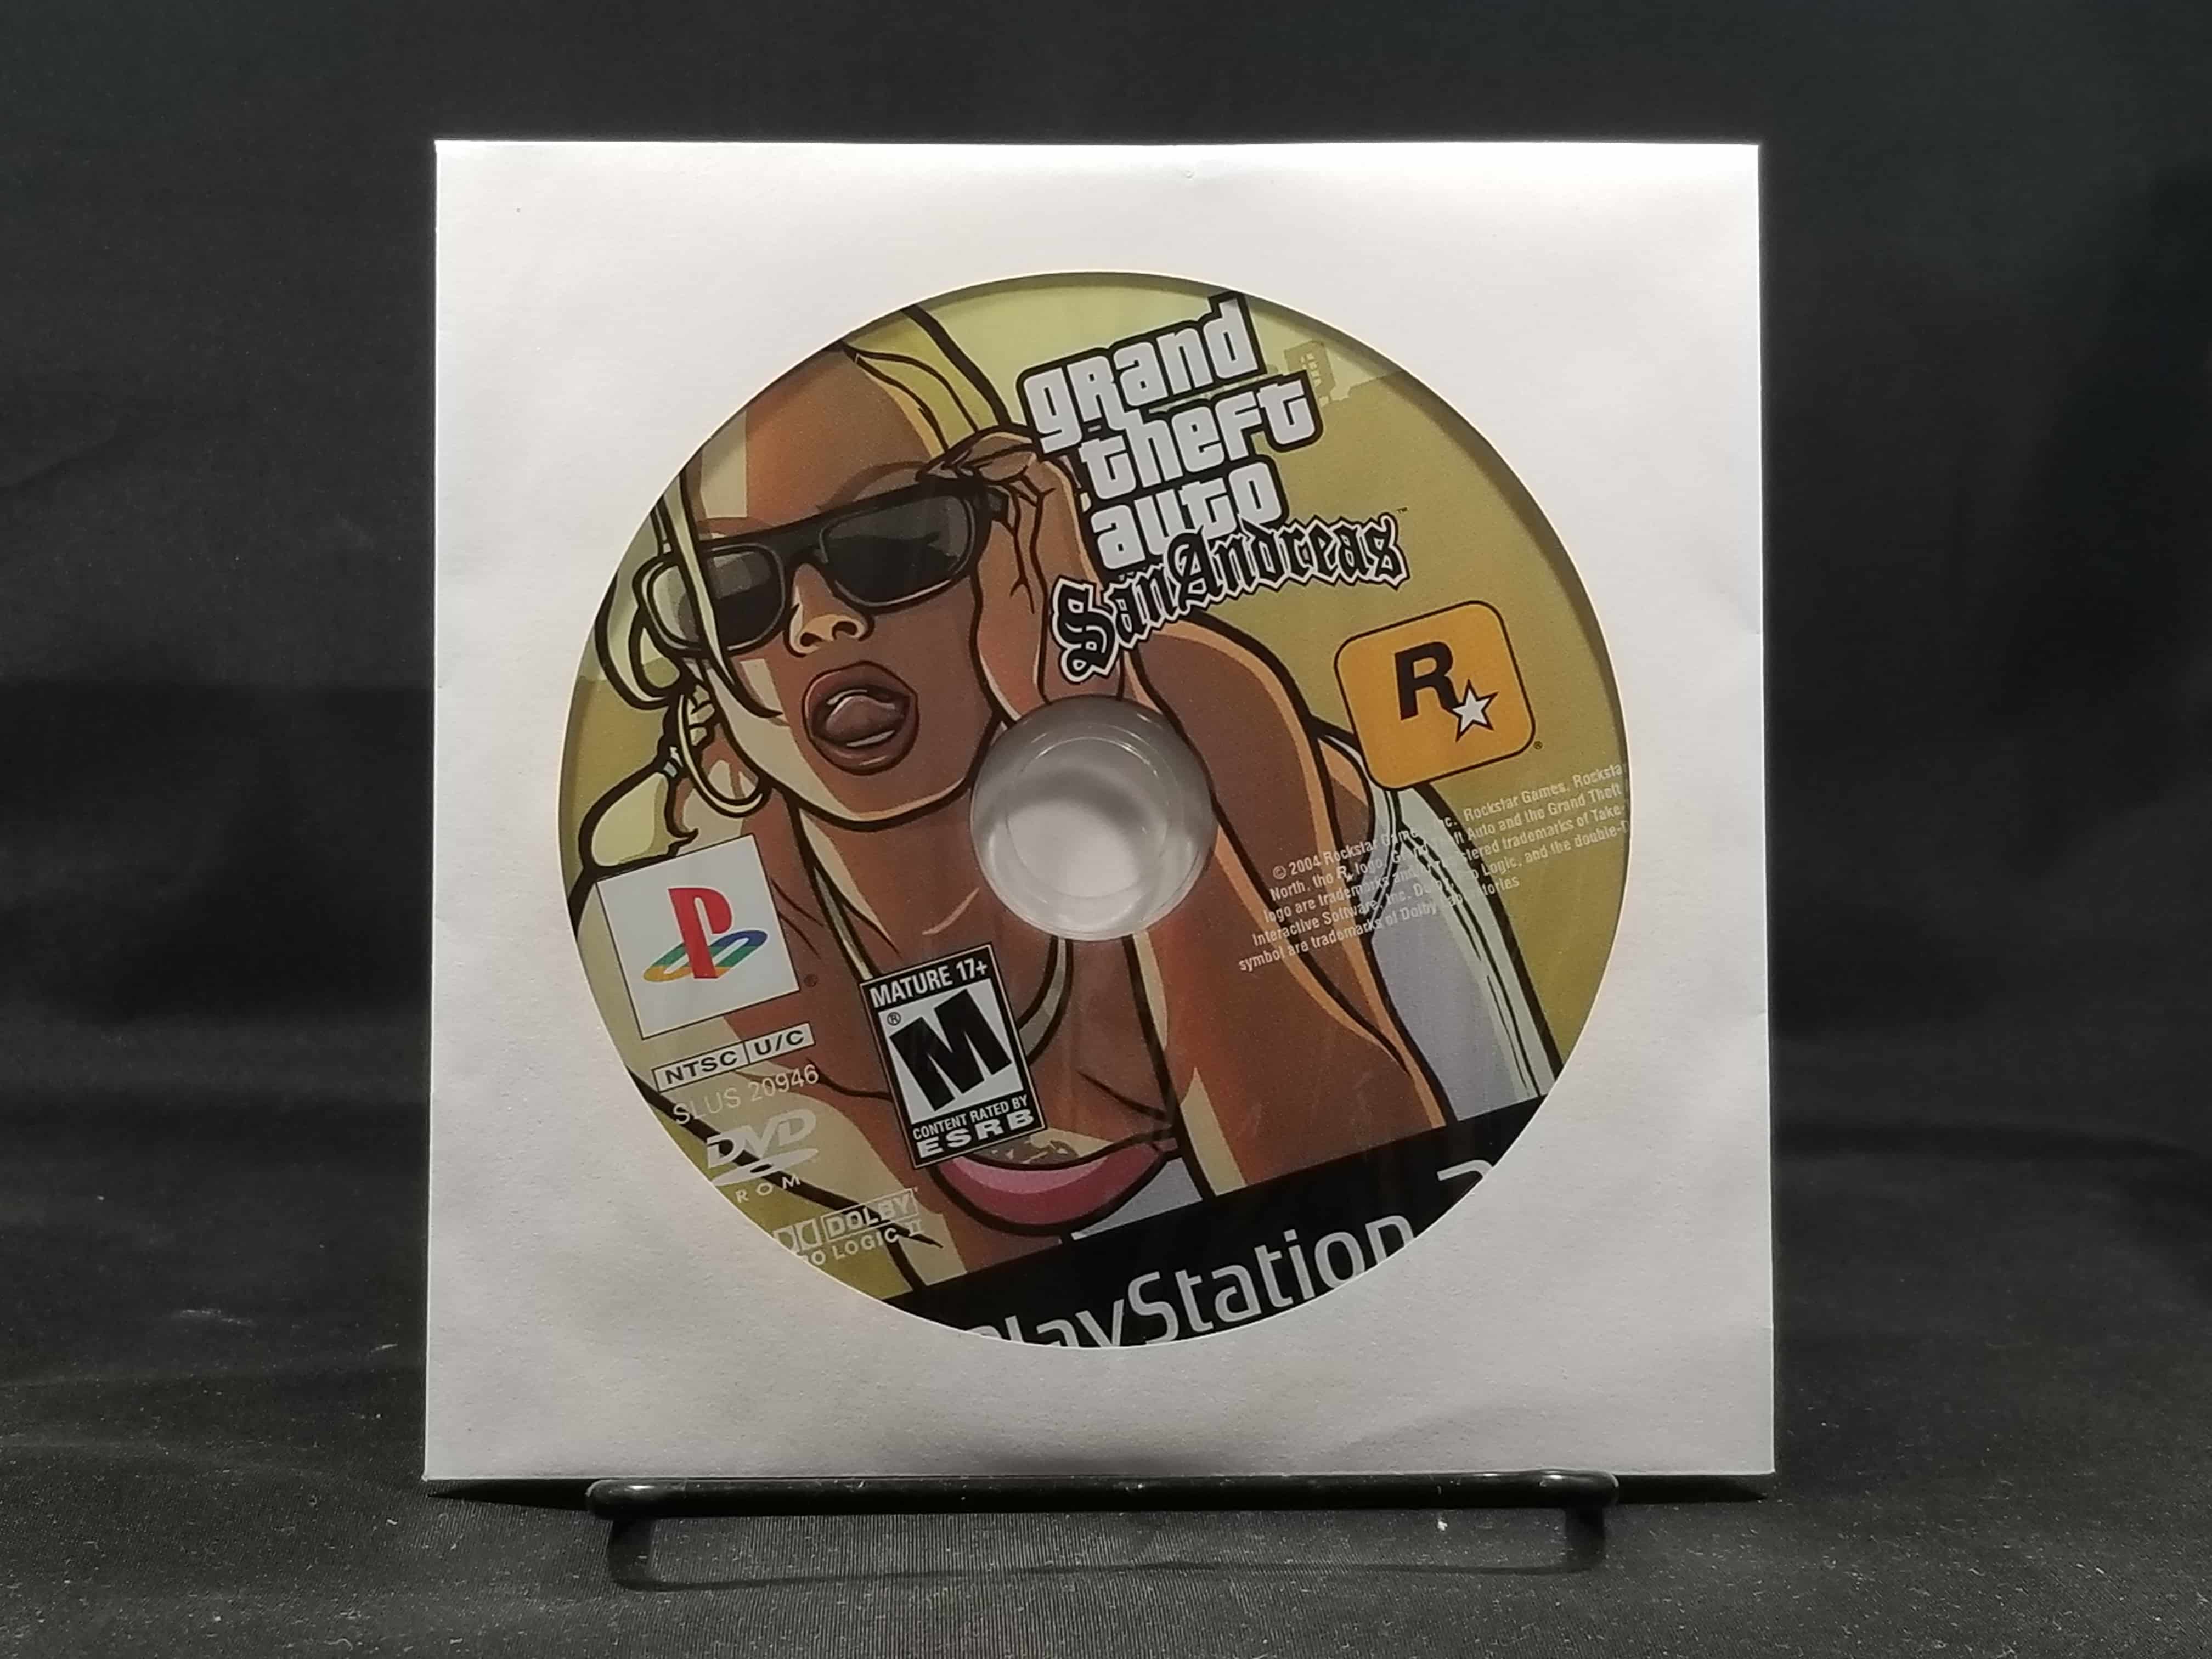 Grand Theft Auto: San Andreas (PlayStation 2, 2004) for sale online